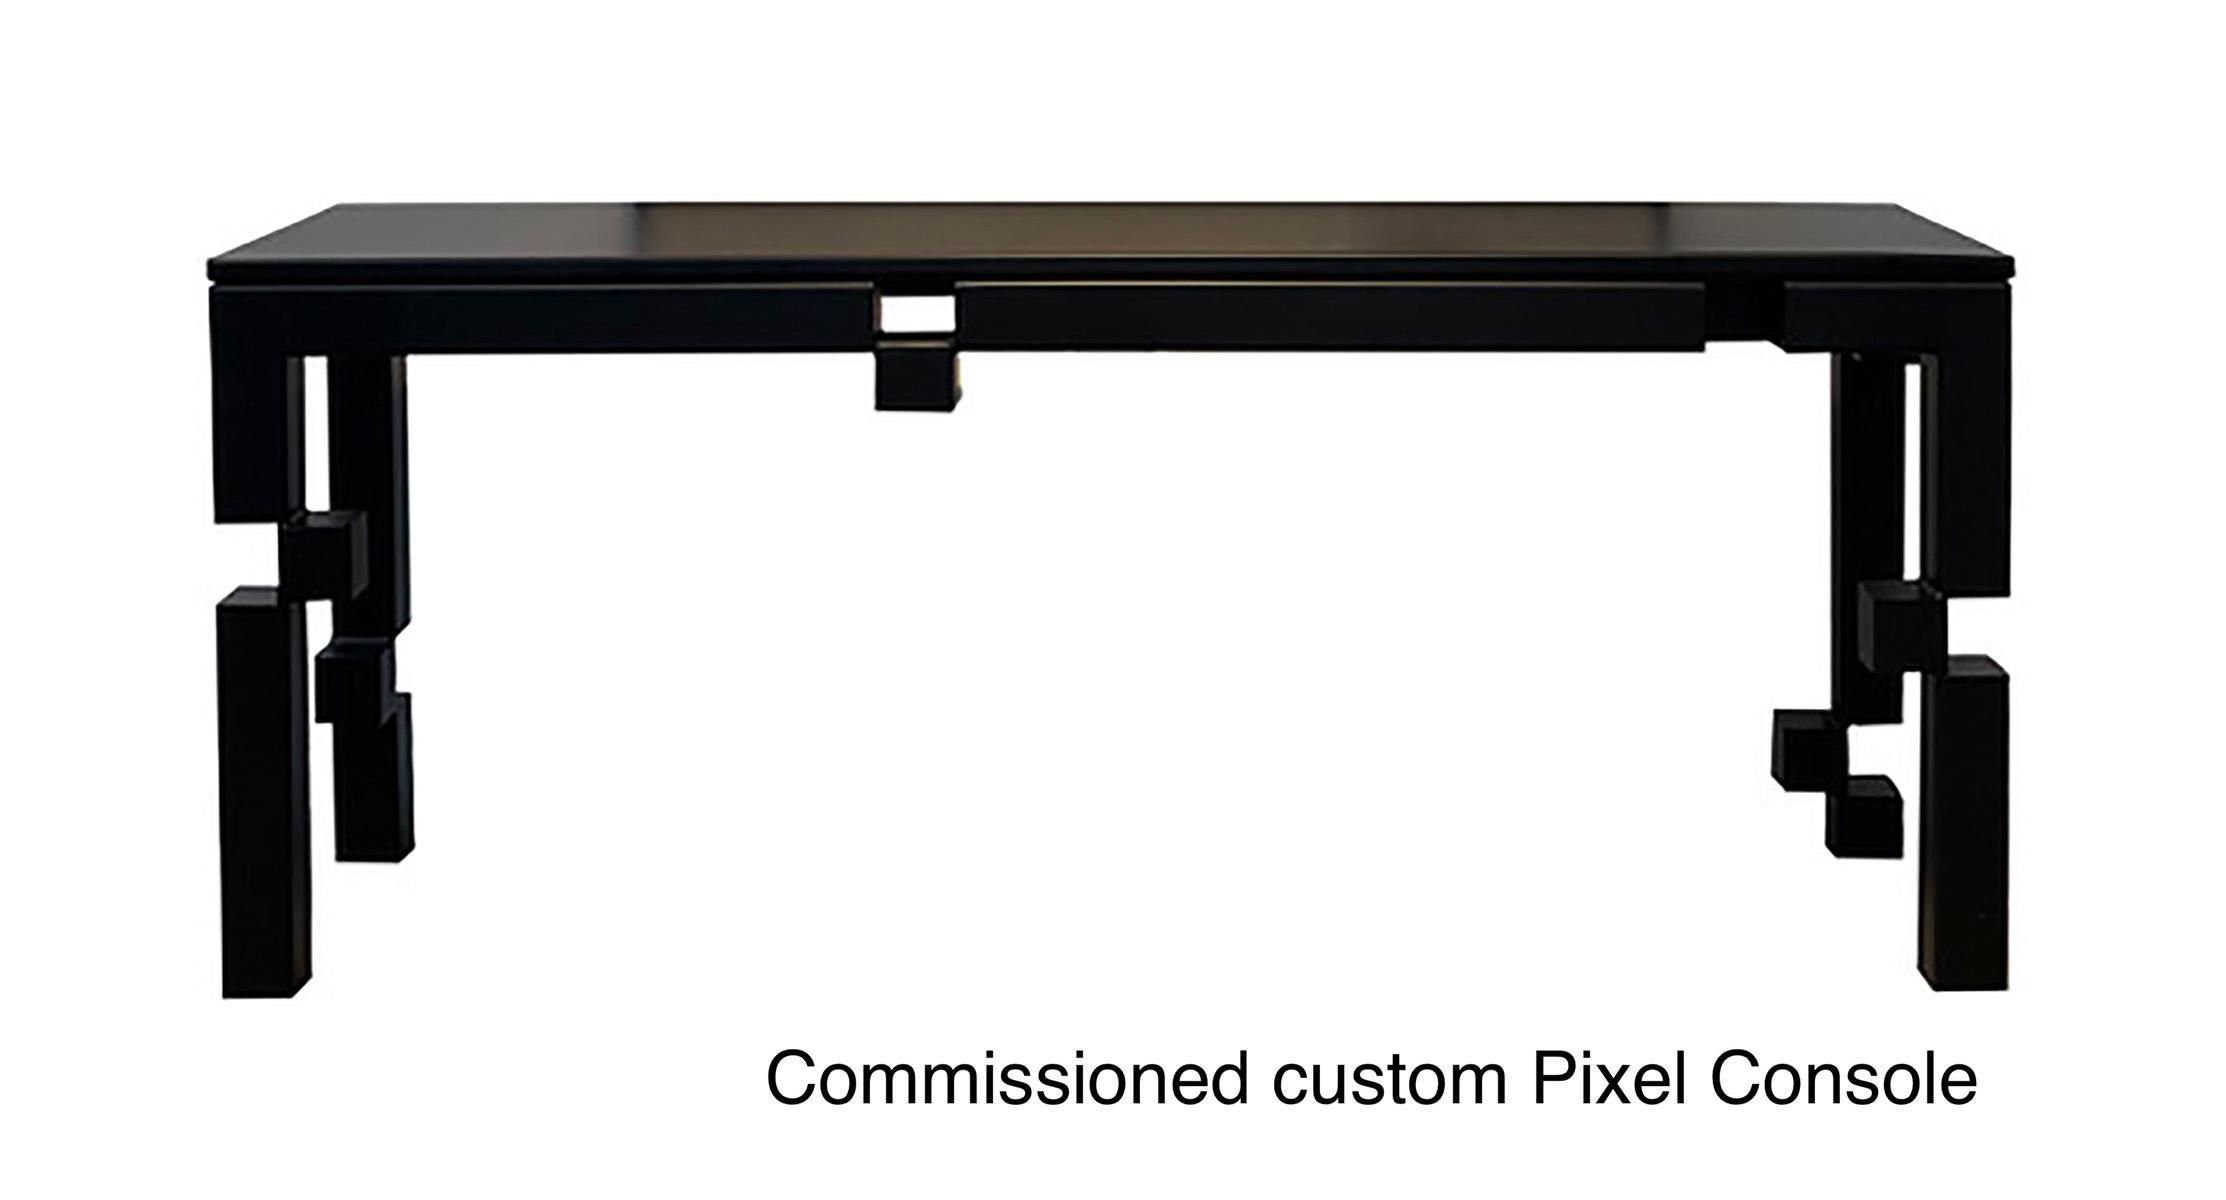 Contemporary Pixel Console by Morgan Clayhall - Sculptural steel For Sale